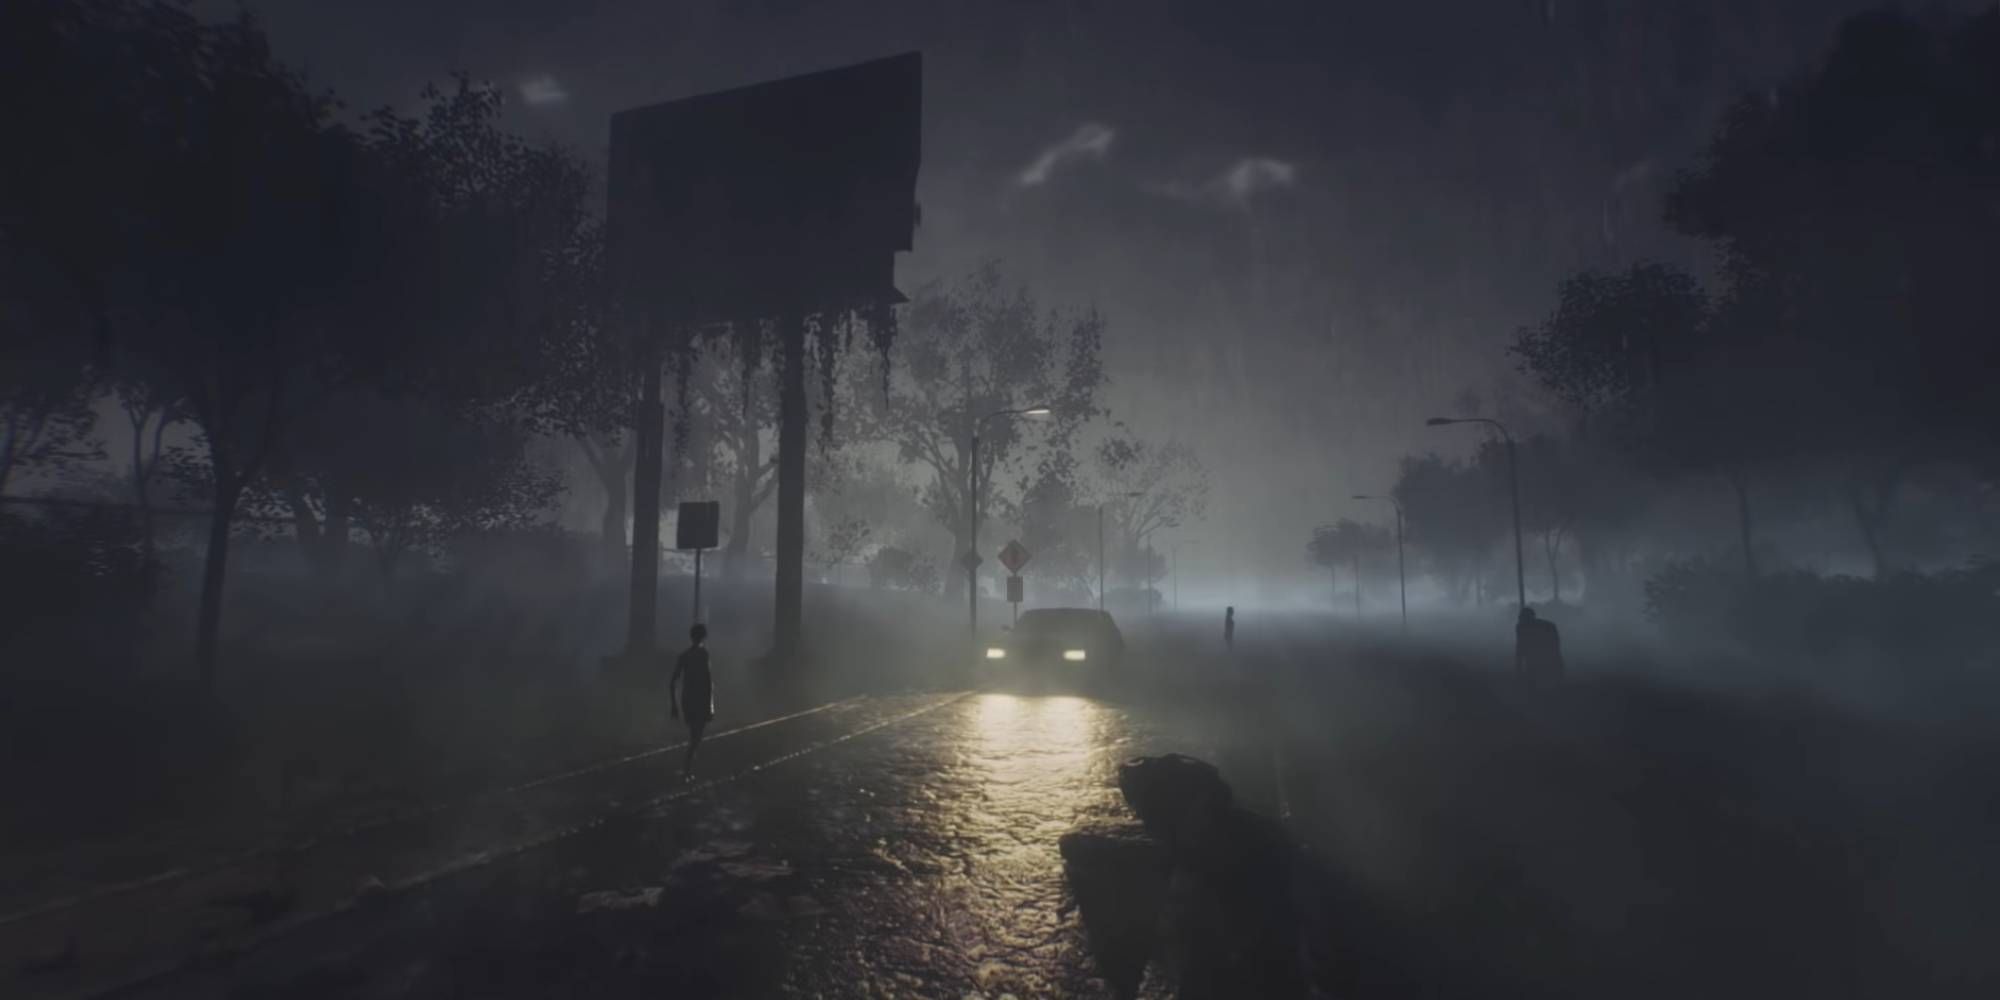 Zombies walking in the road surrounded by a misty atmosphere lit by car headlights